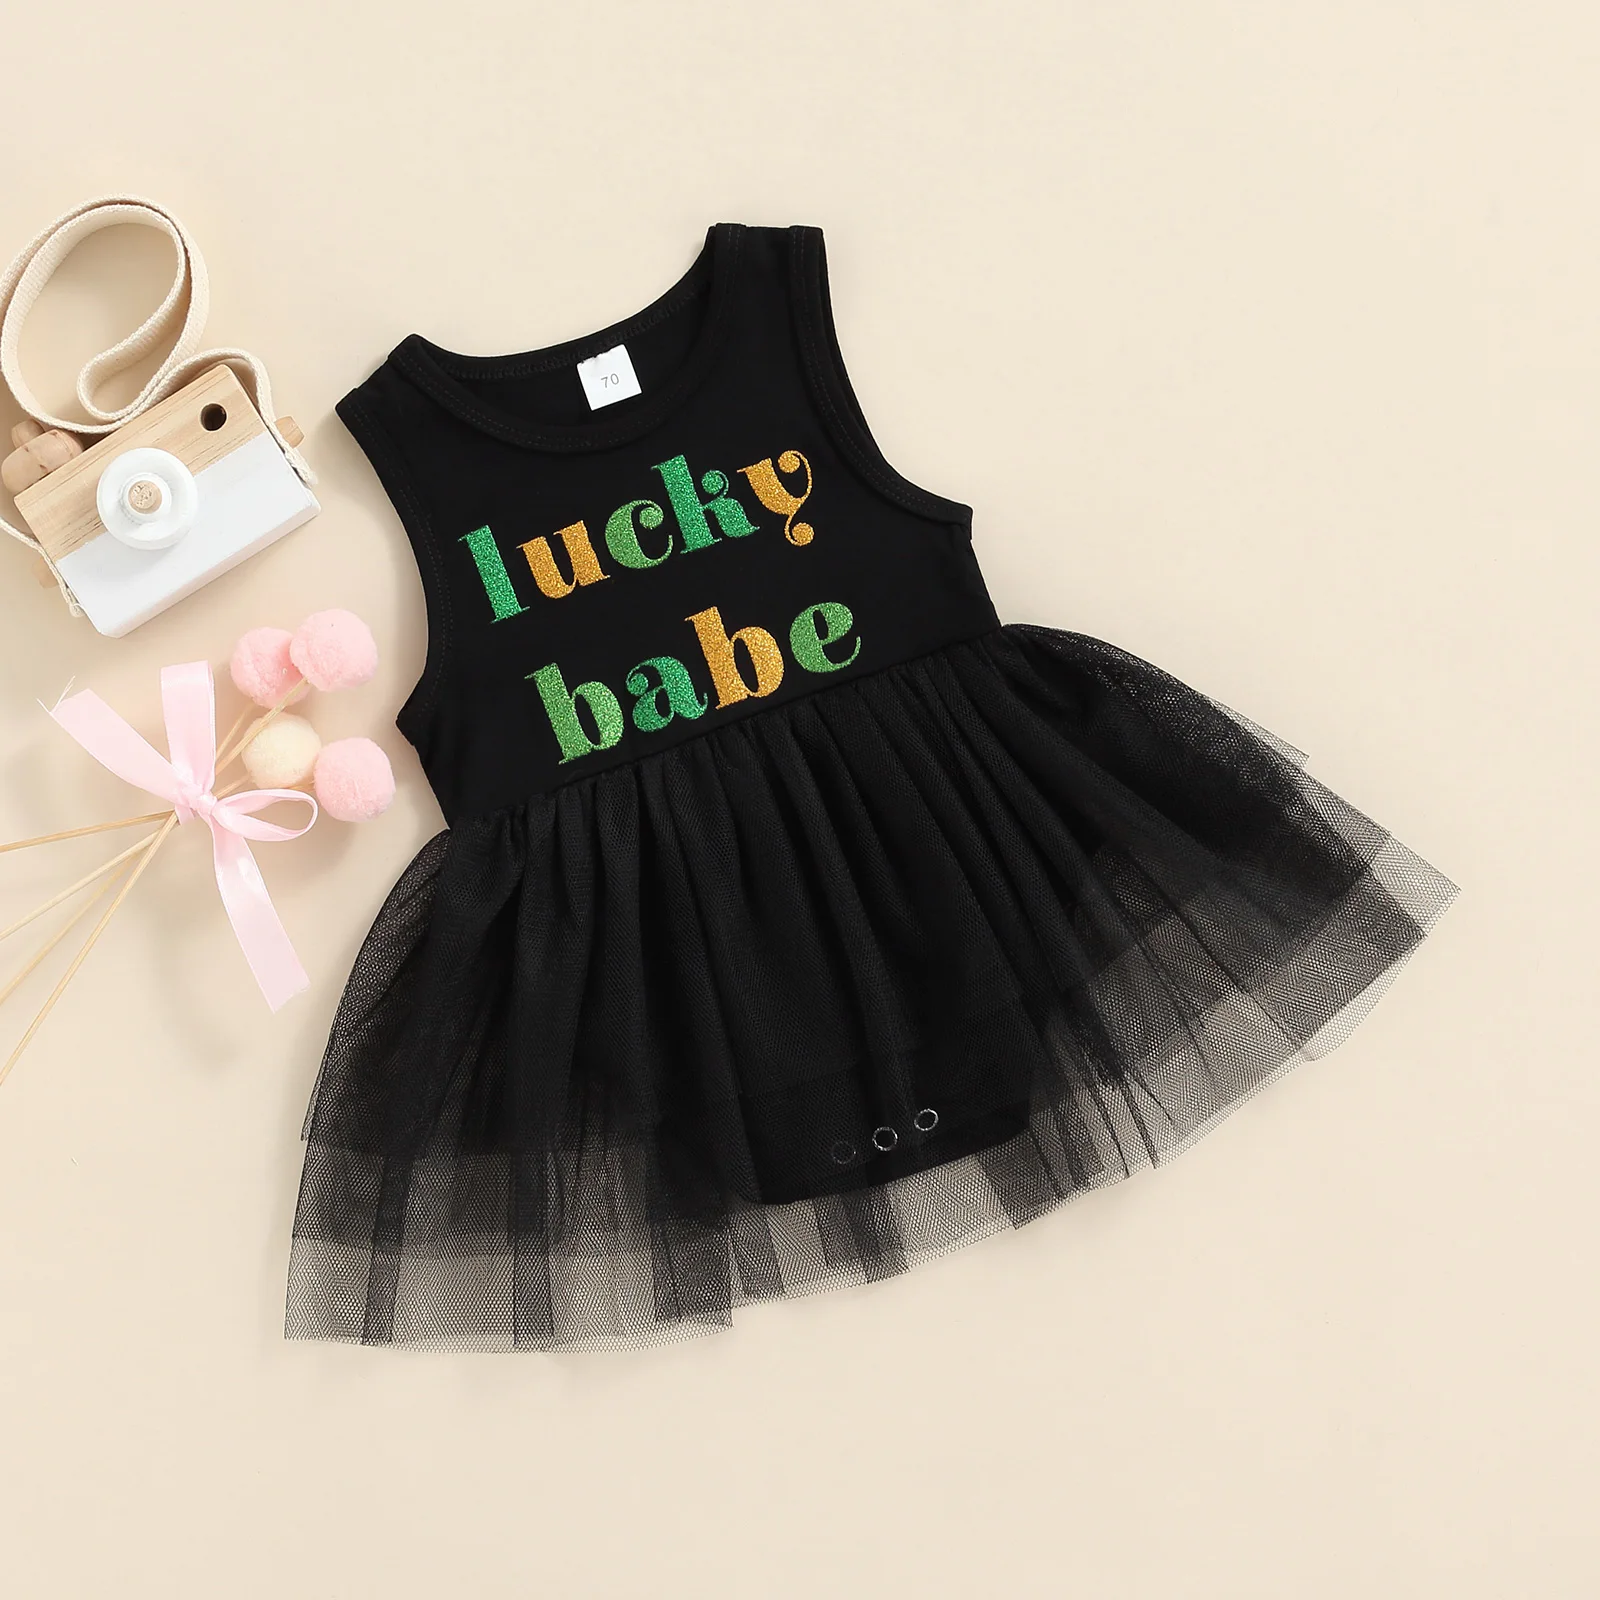 

Infant Baby Girls Casual Romper Dress, Black Round Neck Letters Pattern Sleeveless Yarn Jumpsuits , 0-18 Months 2022 New